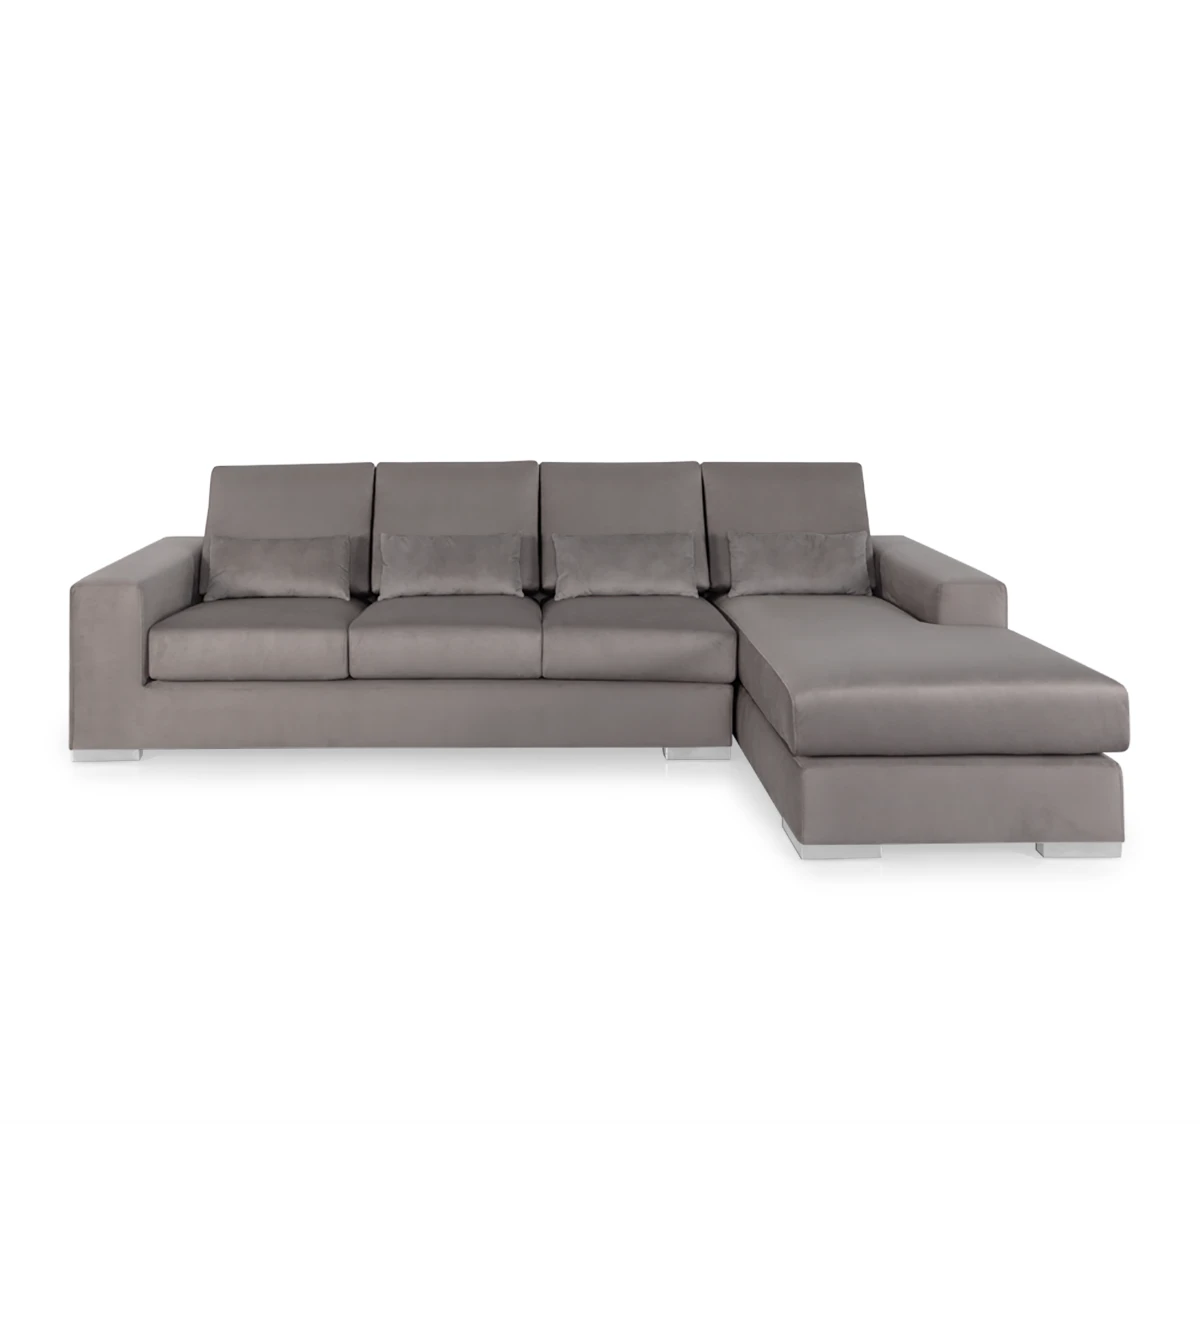 Geneve 3-seater sofa and right chaise longue, upholstered in taupe fabric, 284 cm.